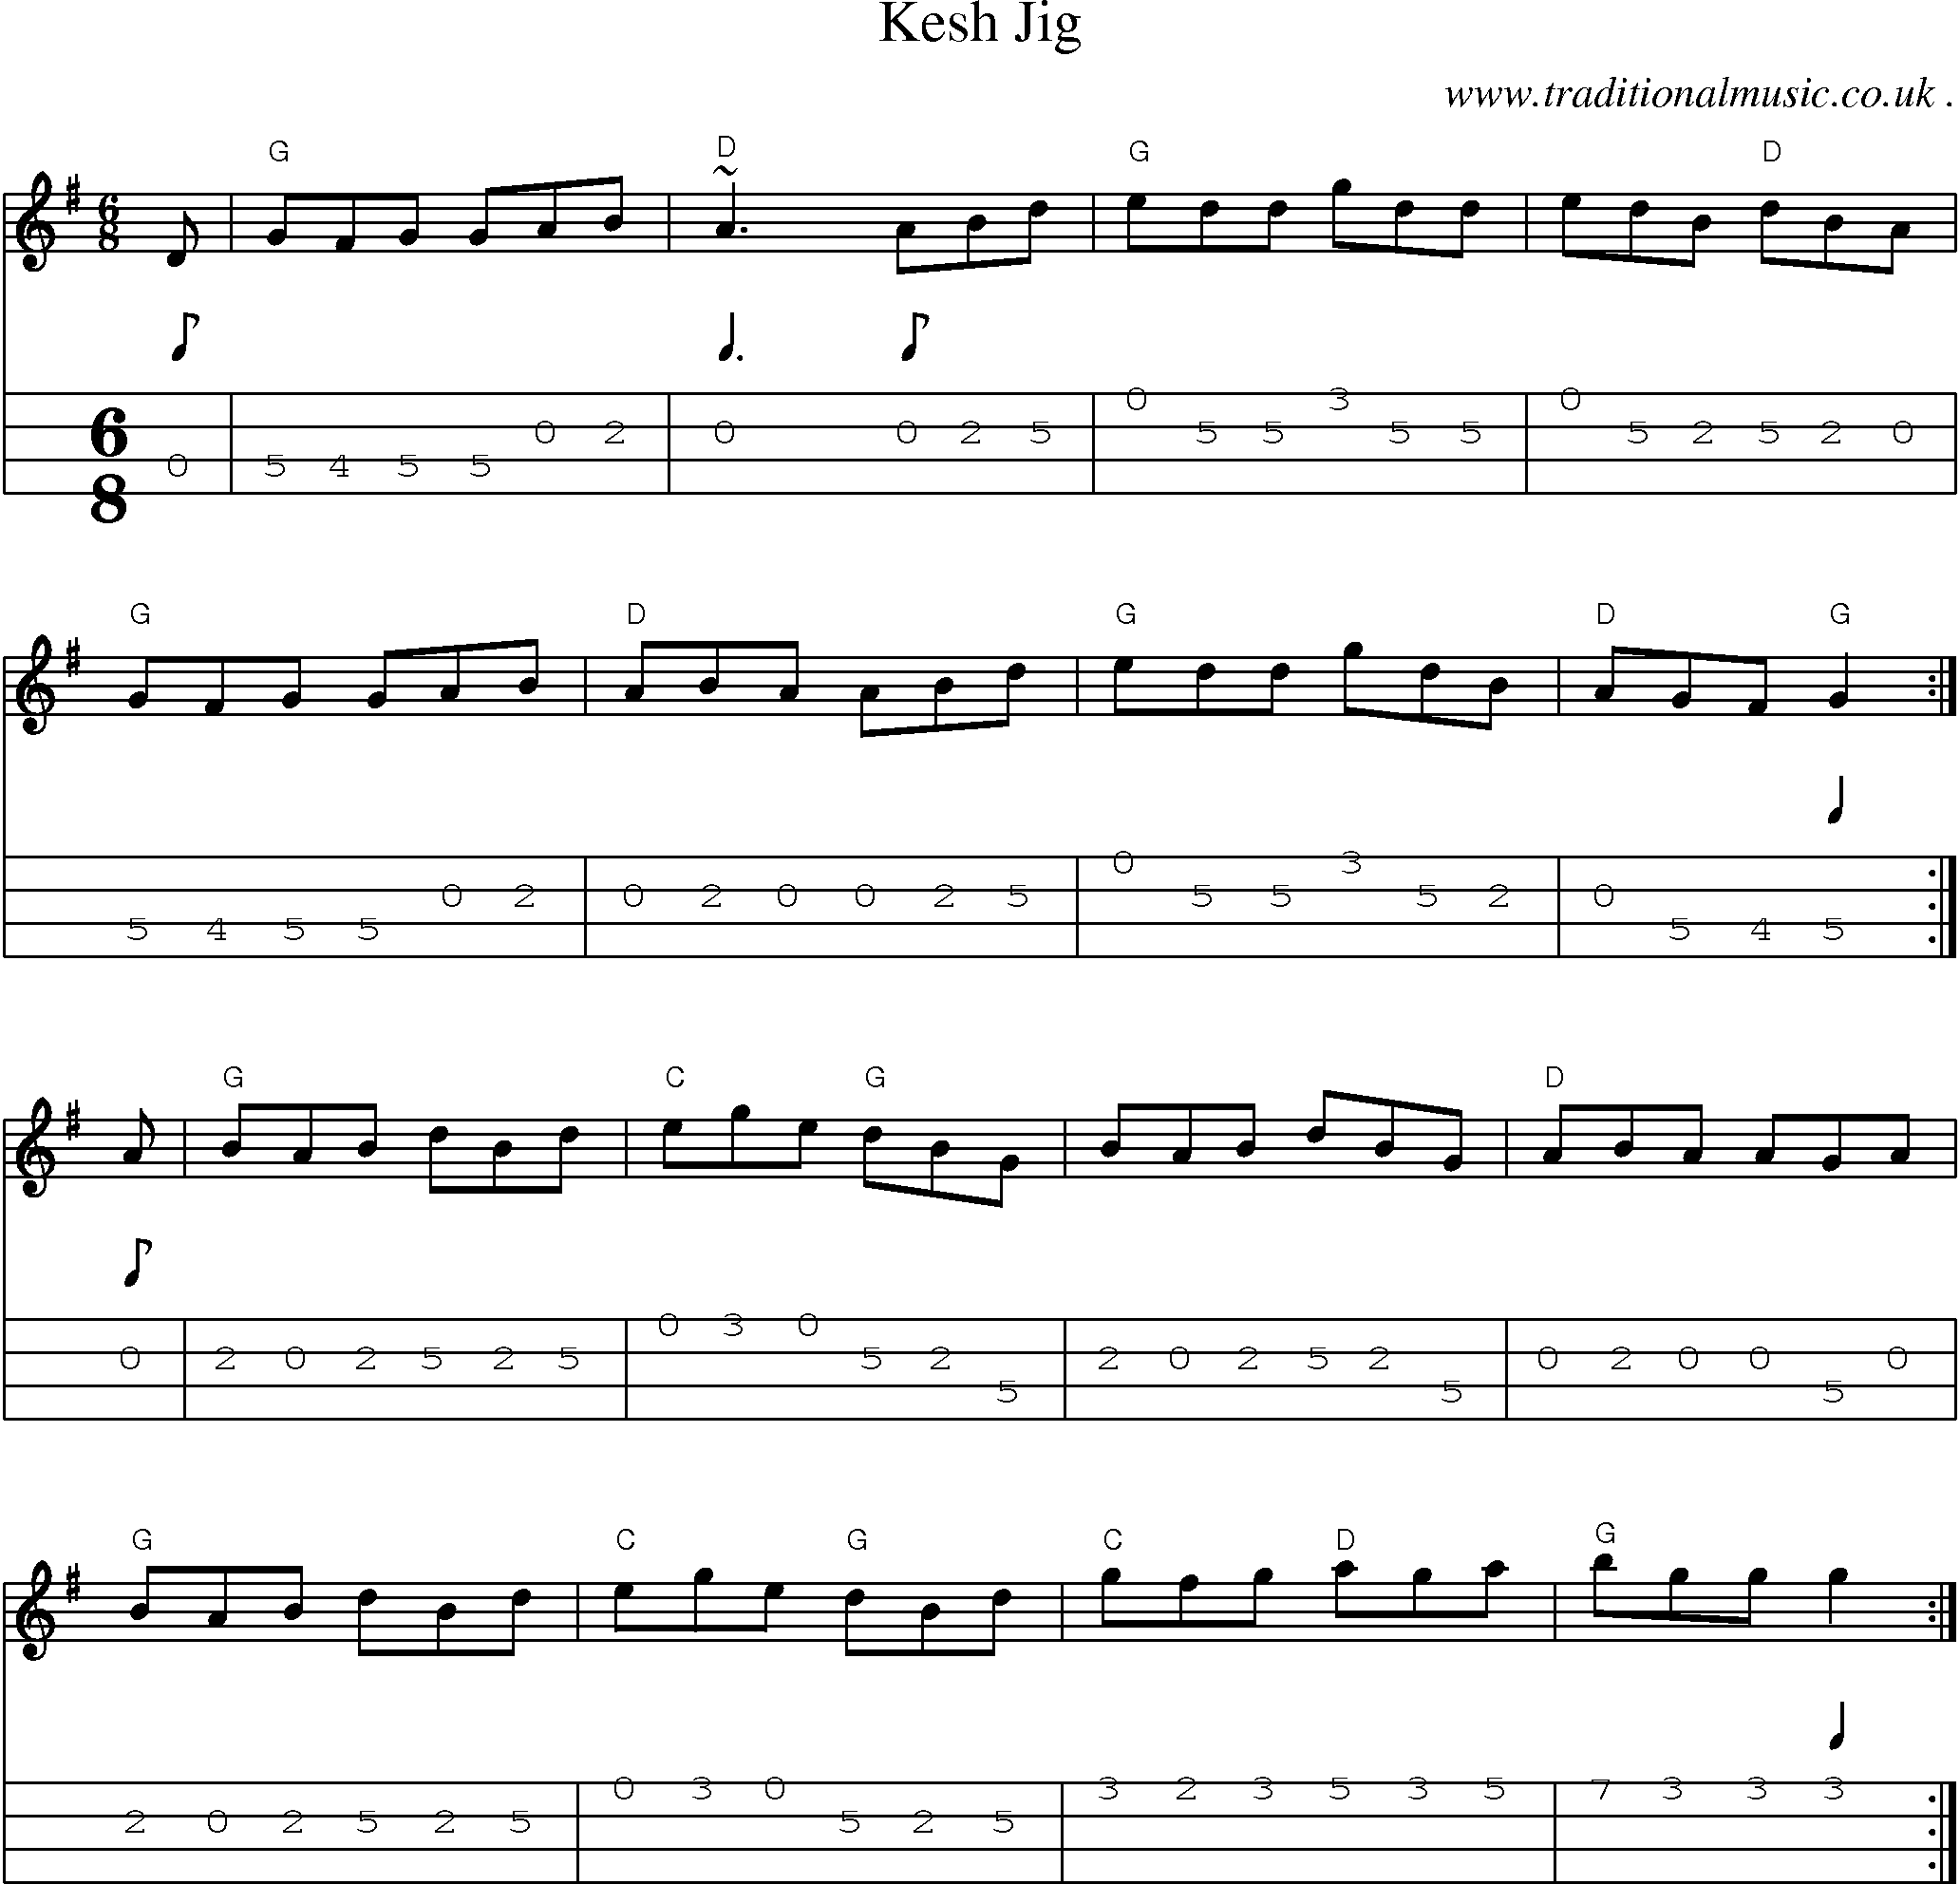 Music Score and Guitar Tabs for Kesh Jig